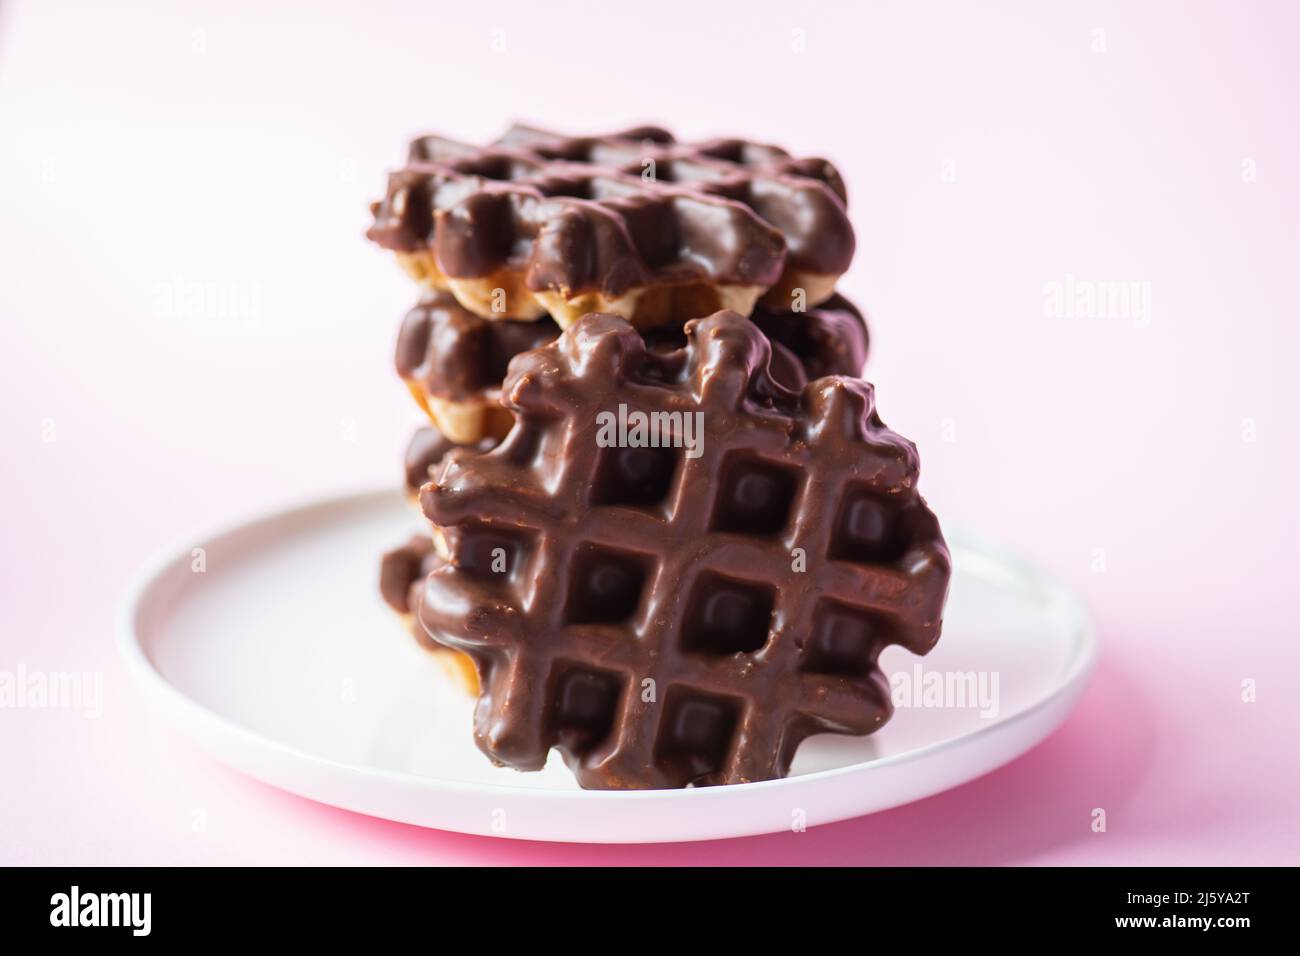 Stack of chocolate waffles. Close up and pink background. Stock Photo